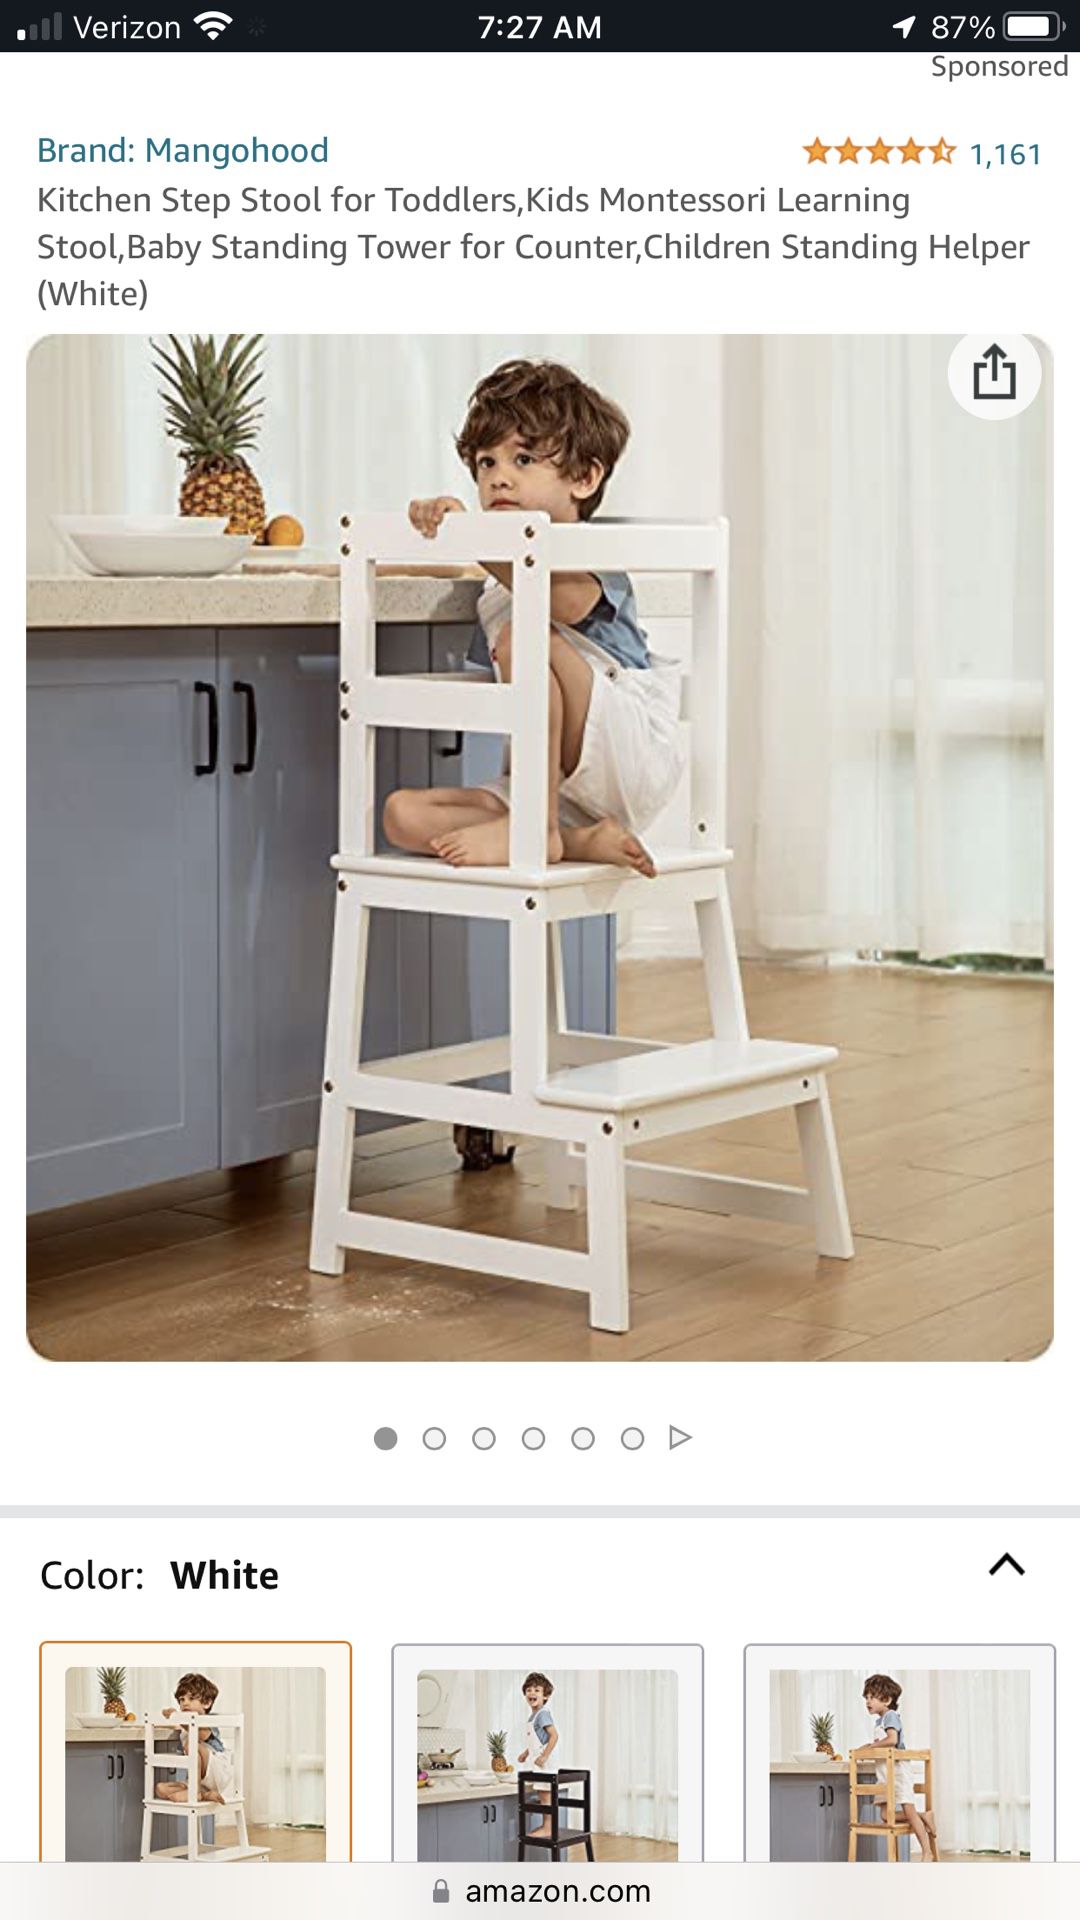 Kitchen Step Stool for Toddlers,Kids Montessori Learning Stool,Baby Standing Tower for Counter,Children Standing Helper (White) New in box